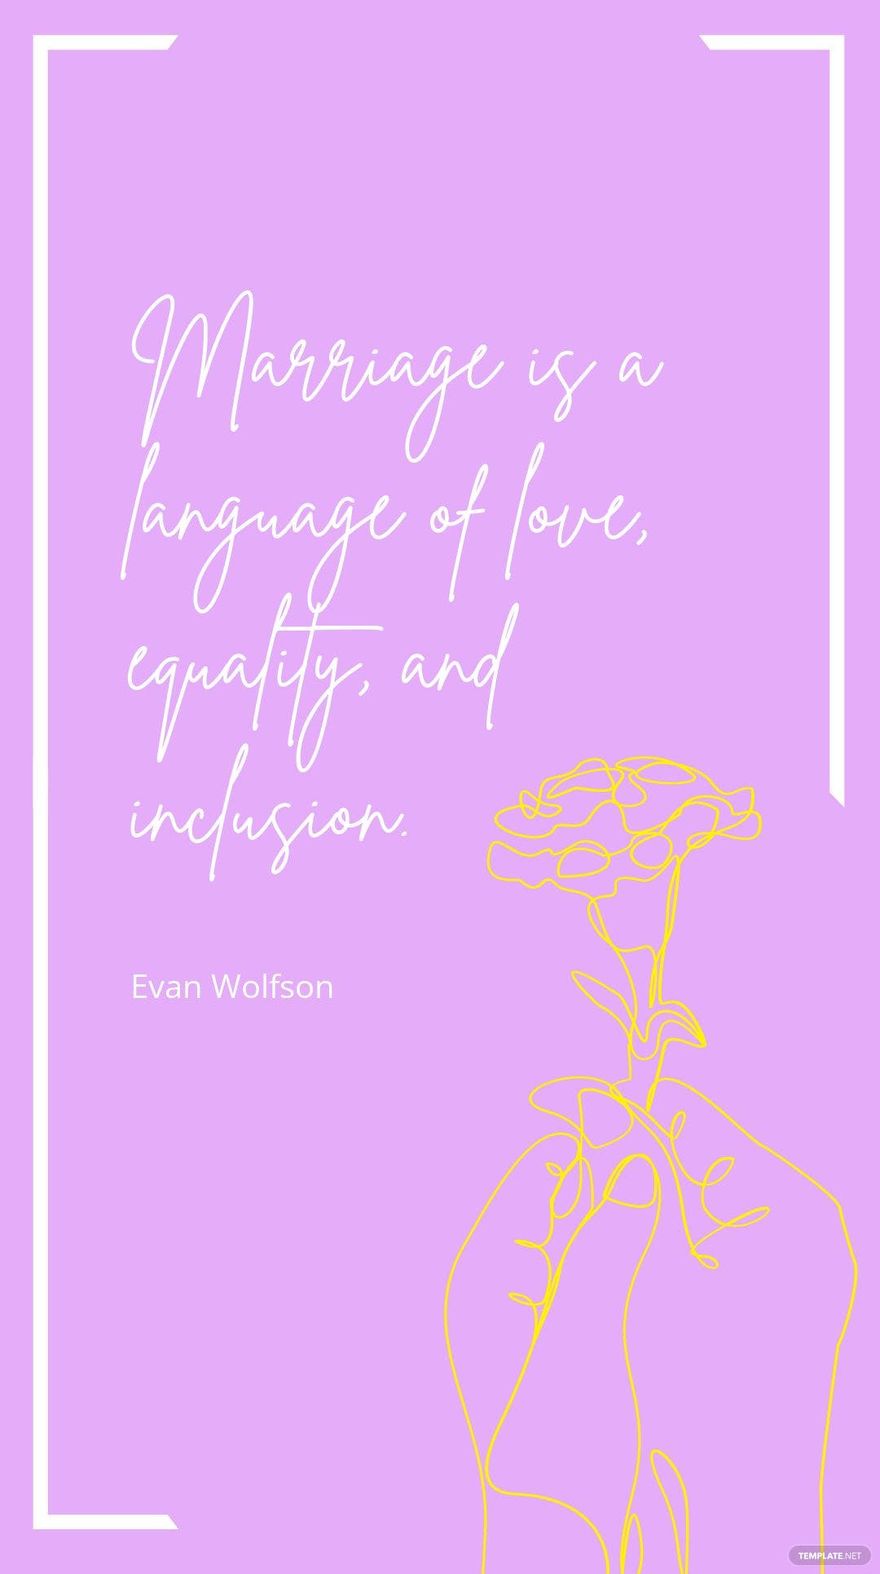 Evan Wolfson - Marriage is a language of love, equality, and inclusion.